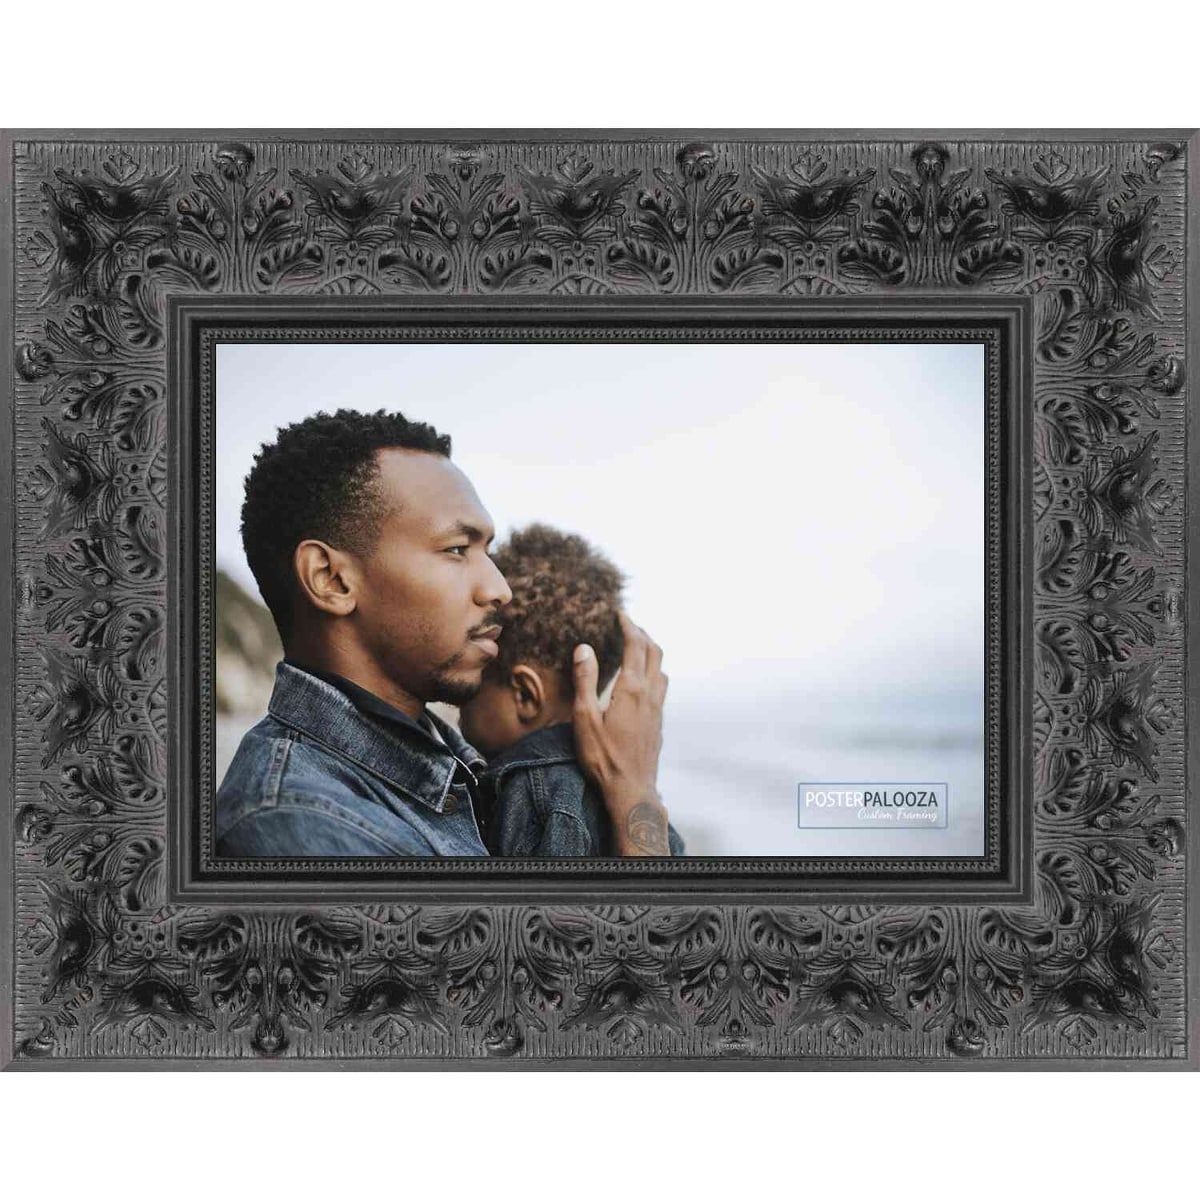 https://ak1.ostkcdn.com/images/products/is/images/direct/f4ceb5c089803e4070ca07f1b8dd9a2c20e0dc96/4x7-Ornate-Black-Complete-Wood-Picture-Frame-with-UV-Acrylic%2C-Foam-Board-Backing%2C-%26-Hardware.jpg